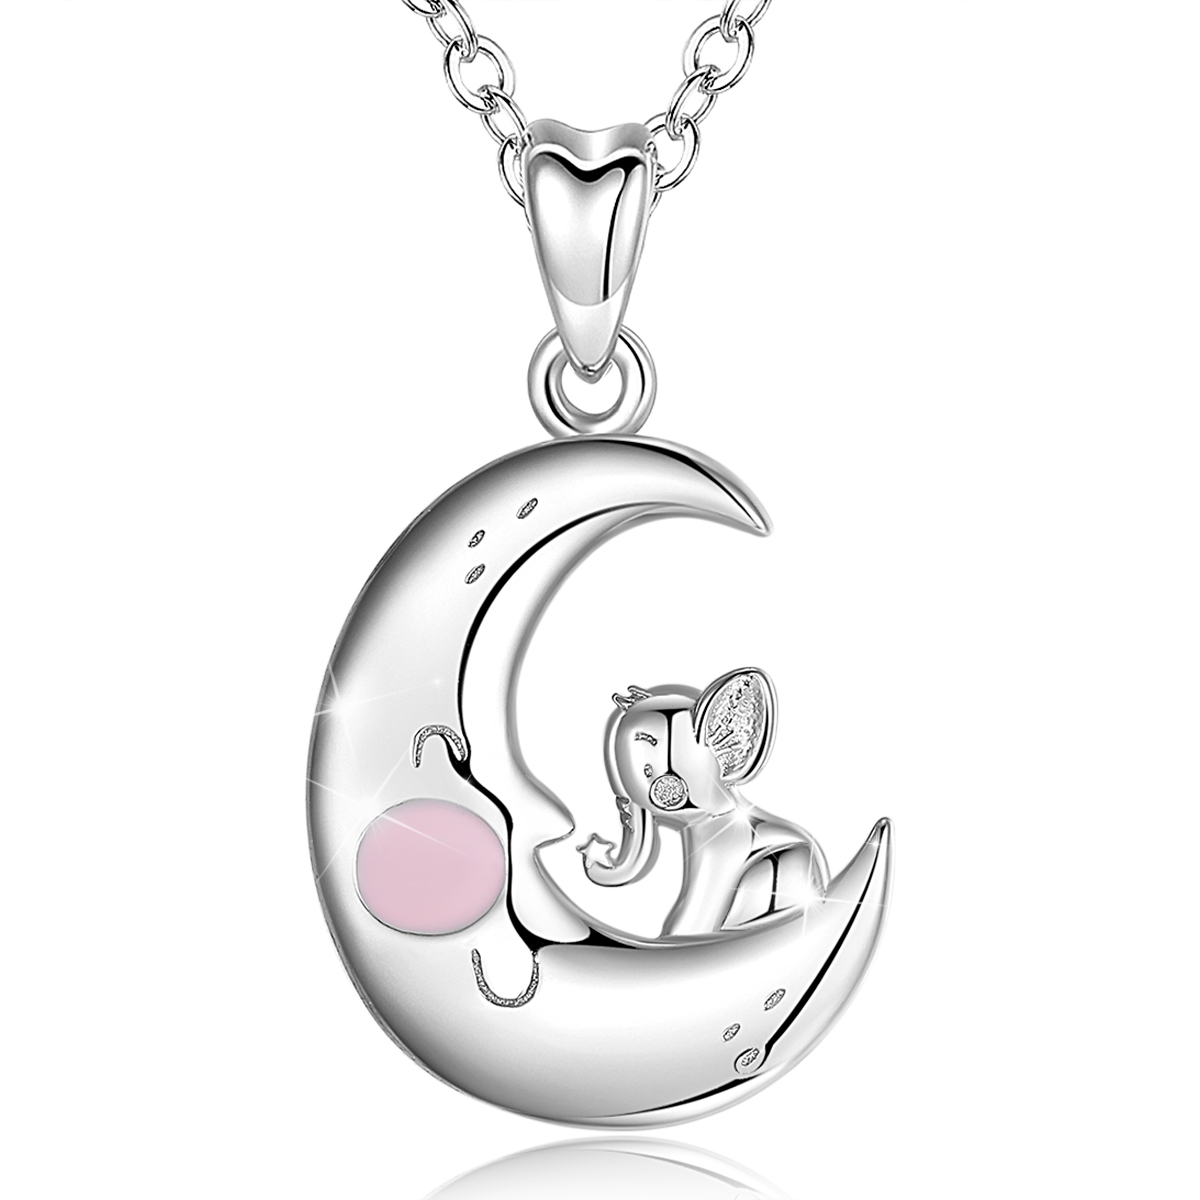 Merryshine Jewelry S925 Sterling Silver Moon and Little Elephant Necklace for Girls